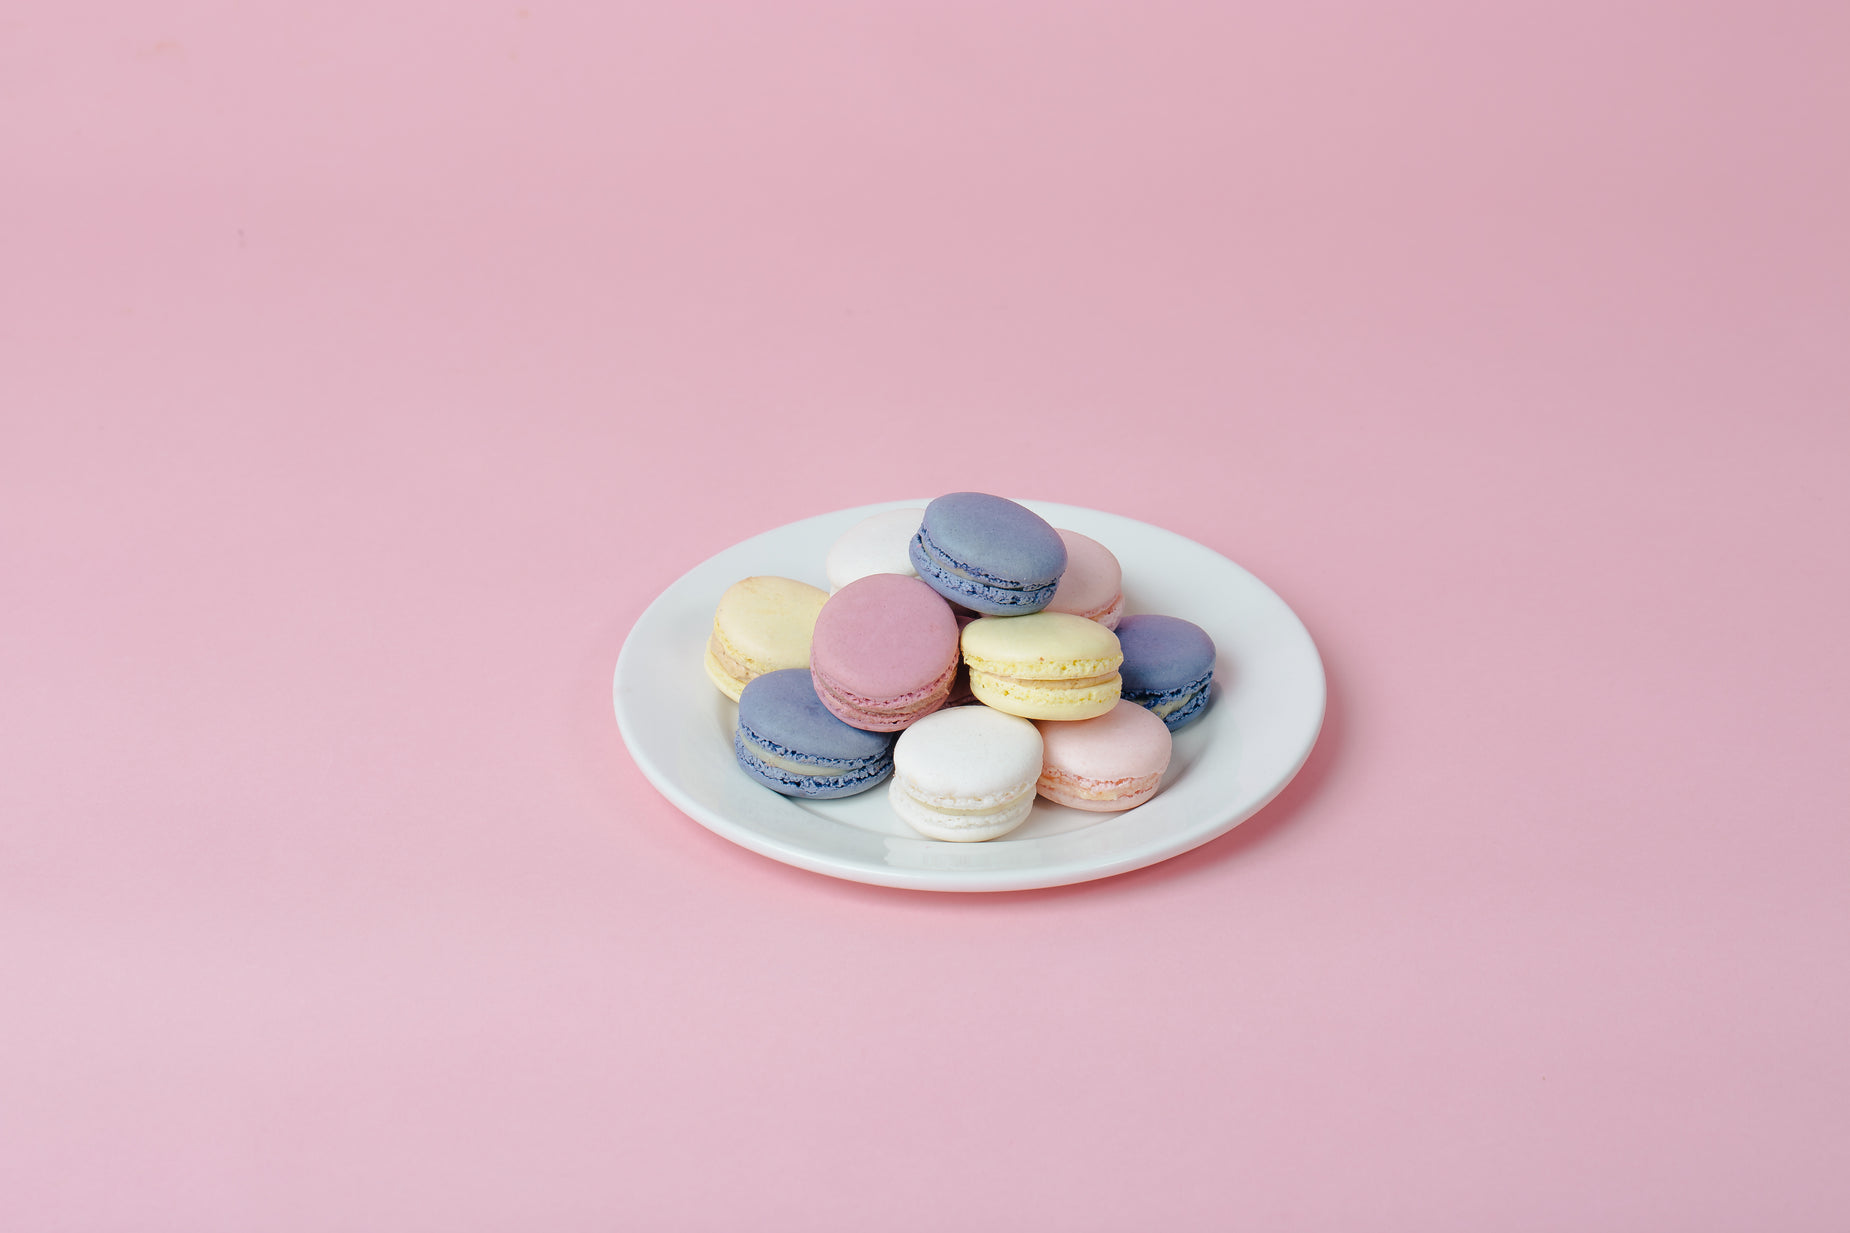 some colorful, round, and plain looking cakes on a plate